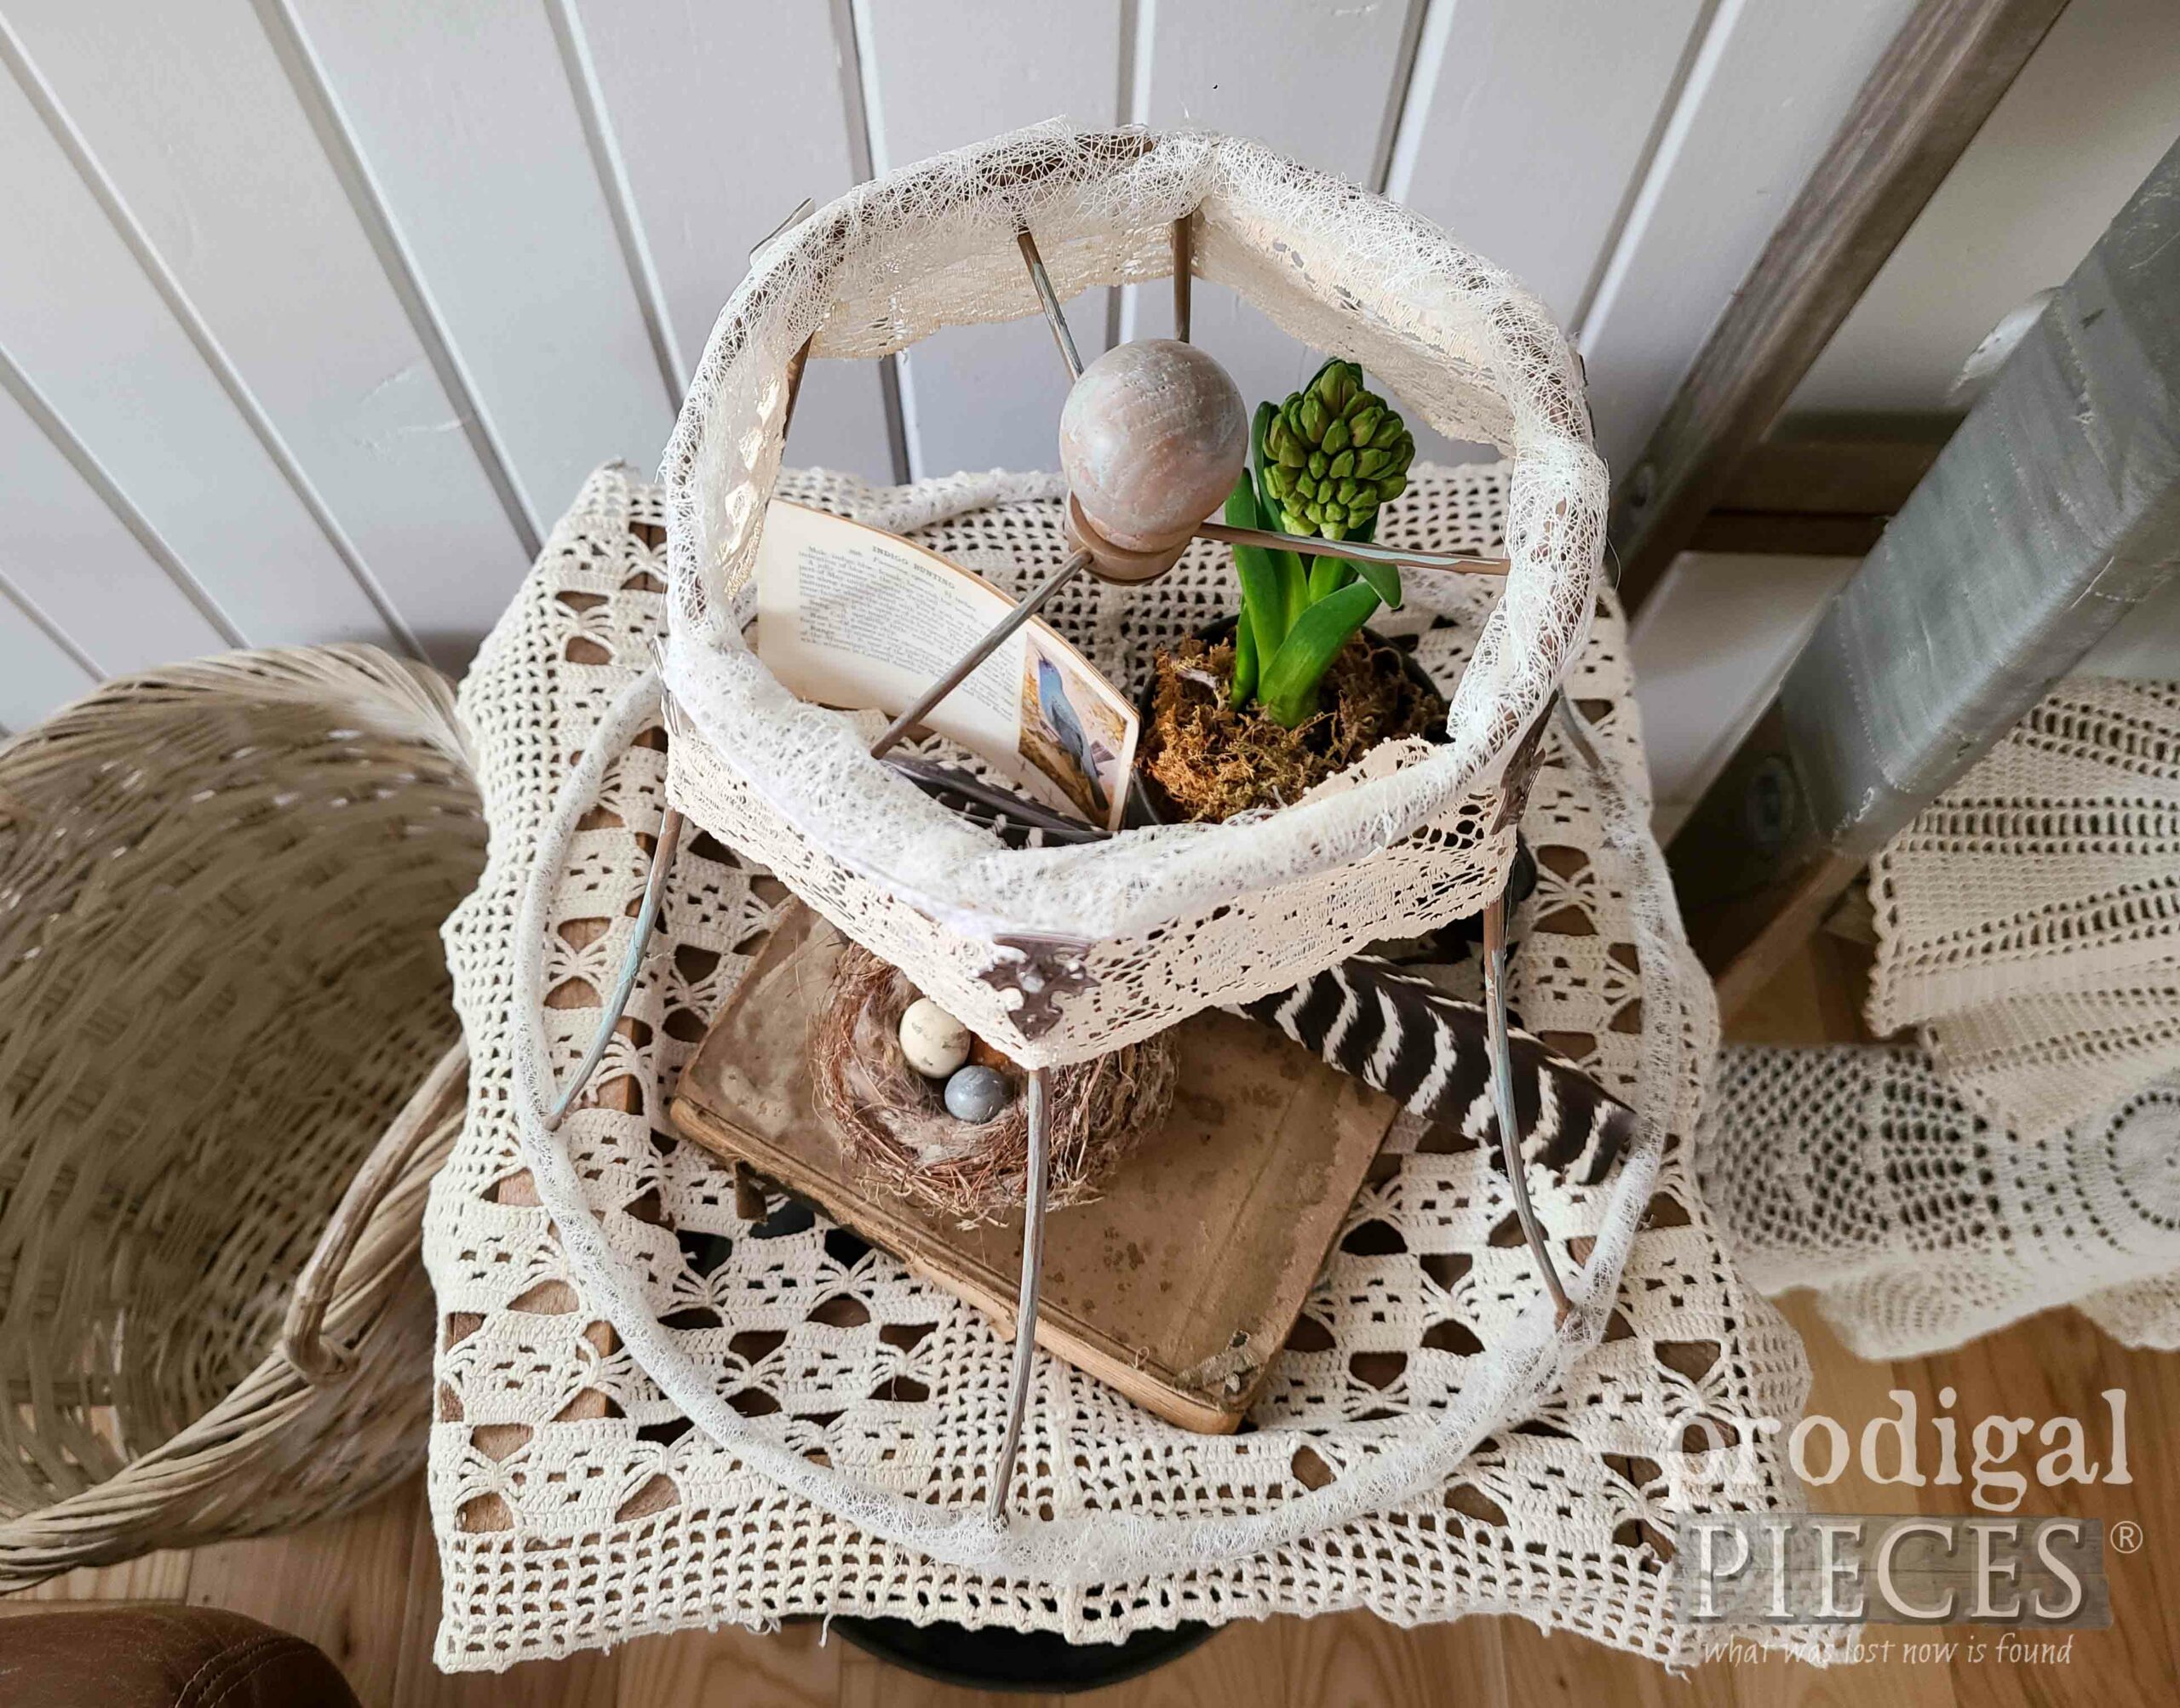 Top View of DIY Lampshade Cloche by Larissa of Prodigal Pieces | prodigalpieces.com #prodigalpieces #upcycled #diy #trashure